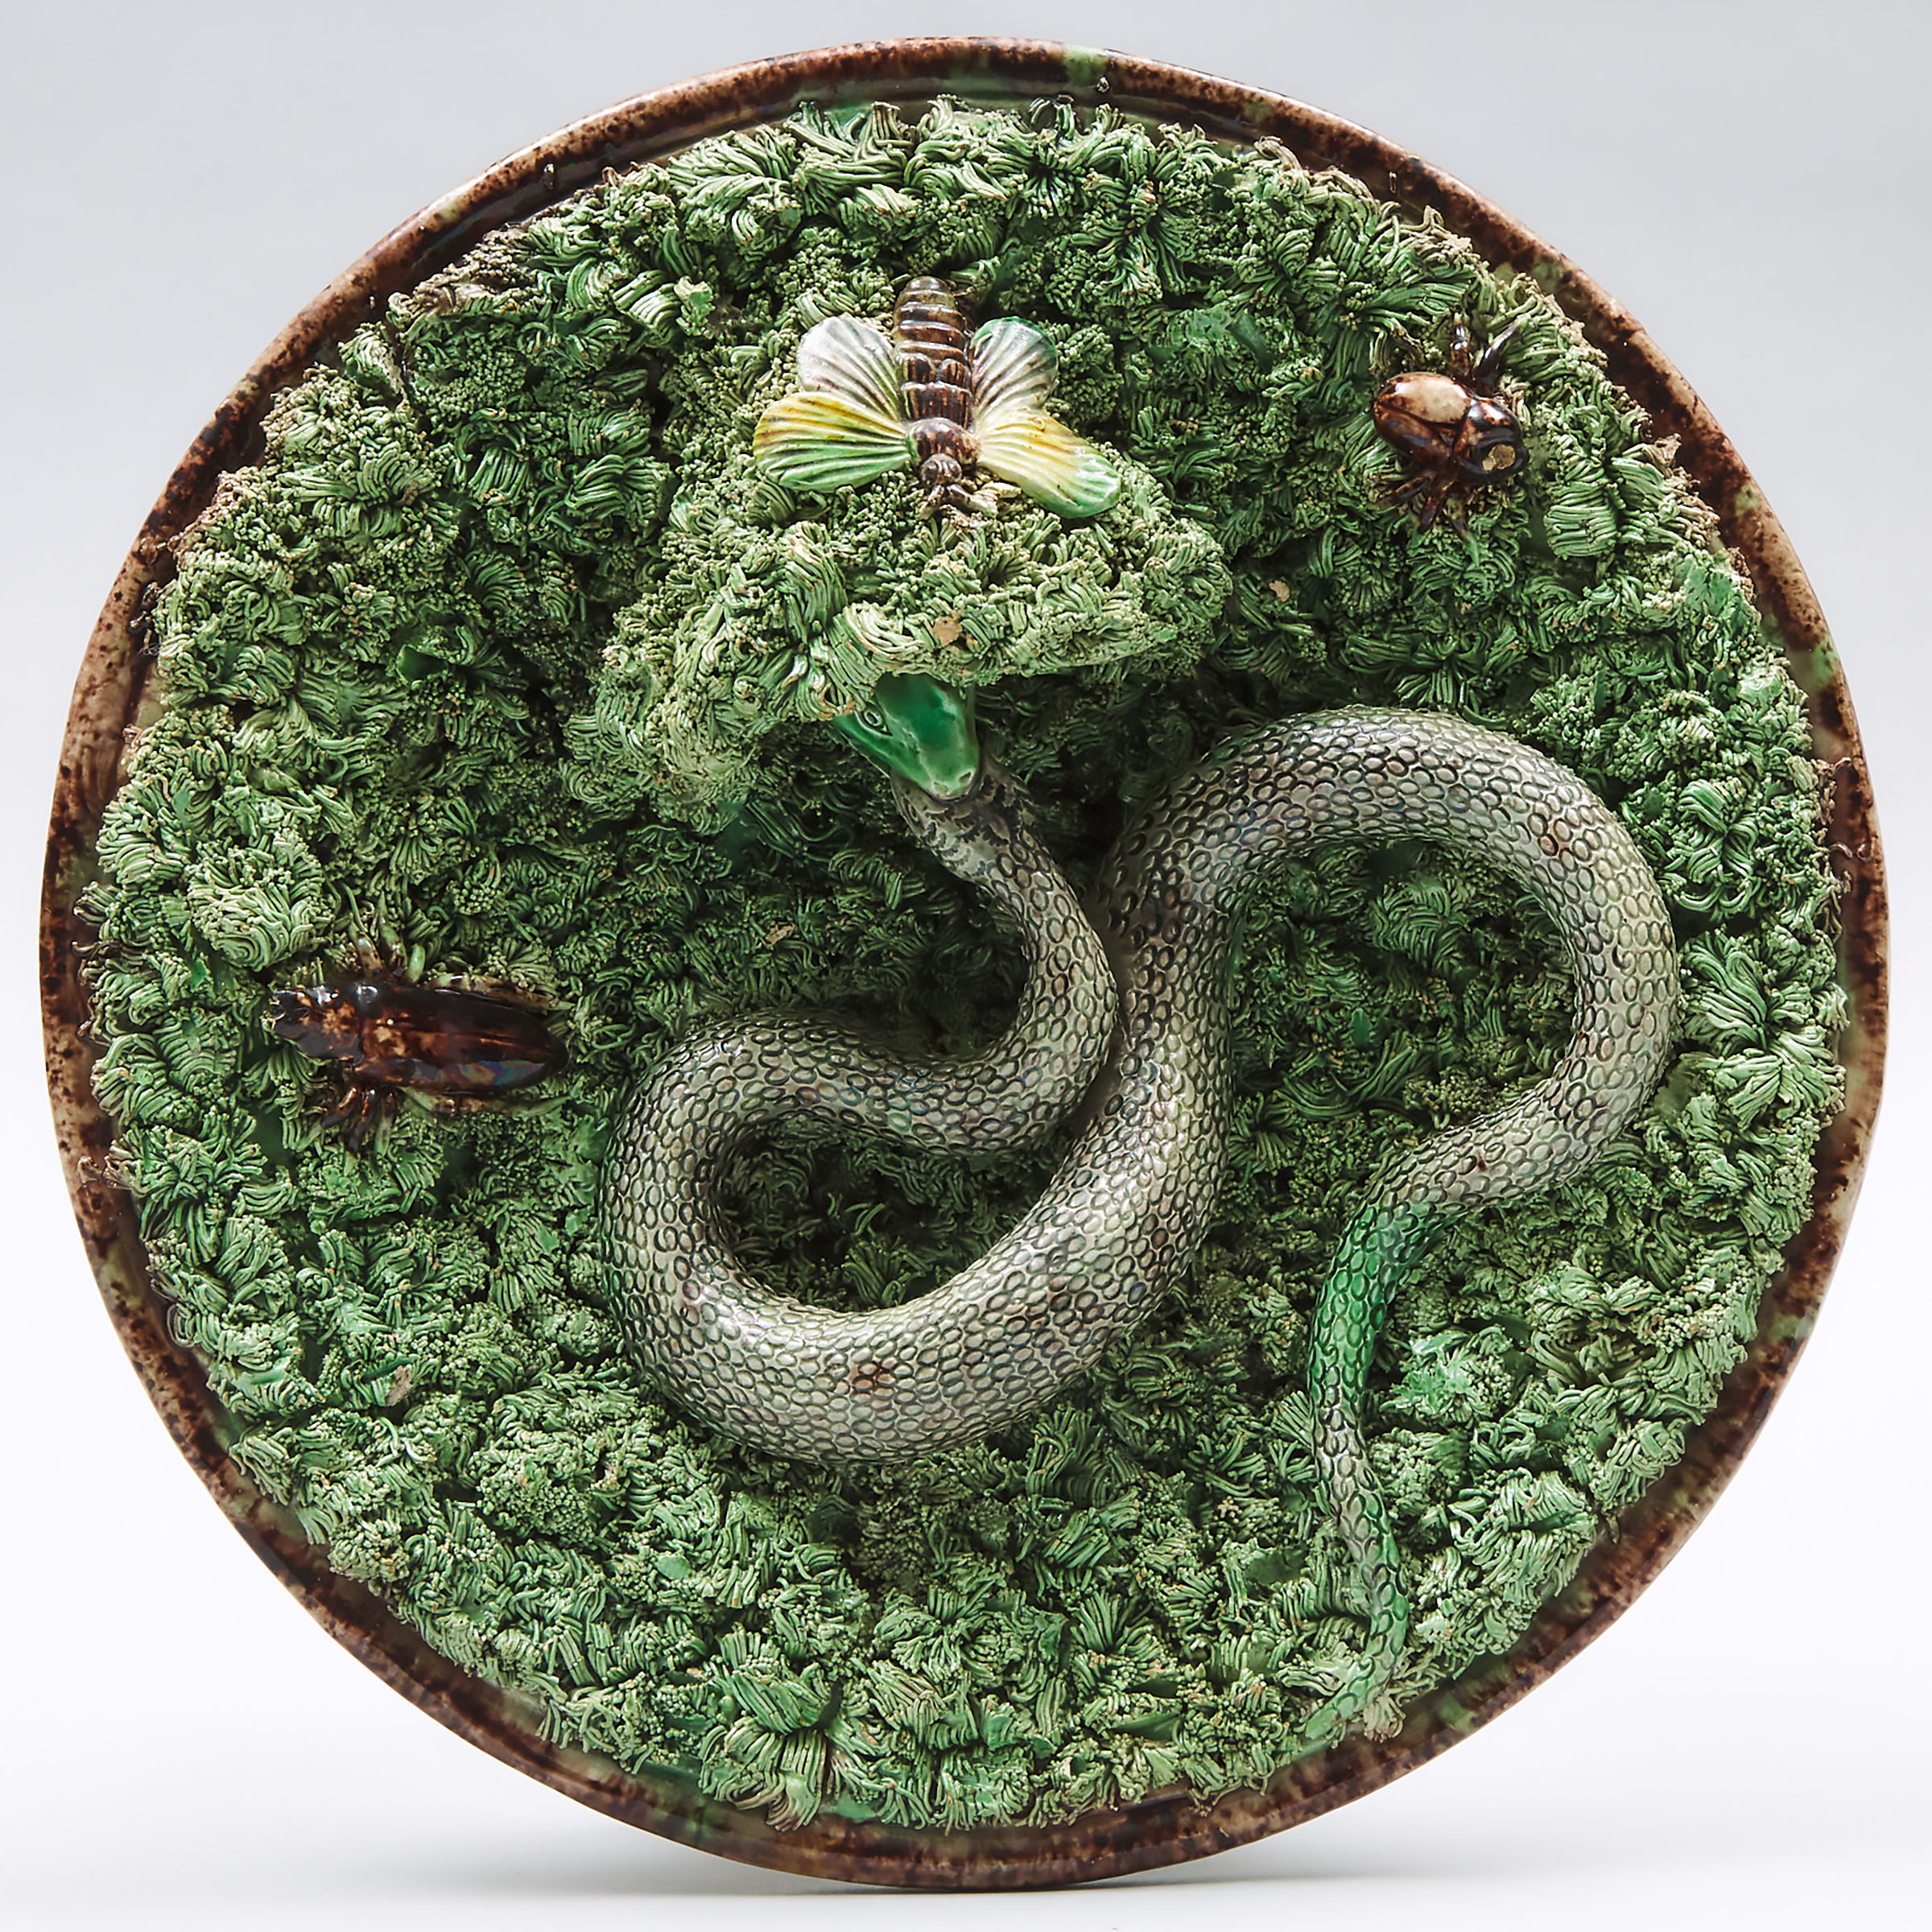 Mafra Majolica Palissy-Style Circular Wall Plaque, late 19th century